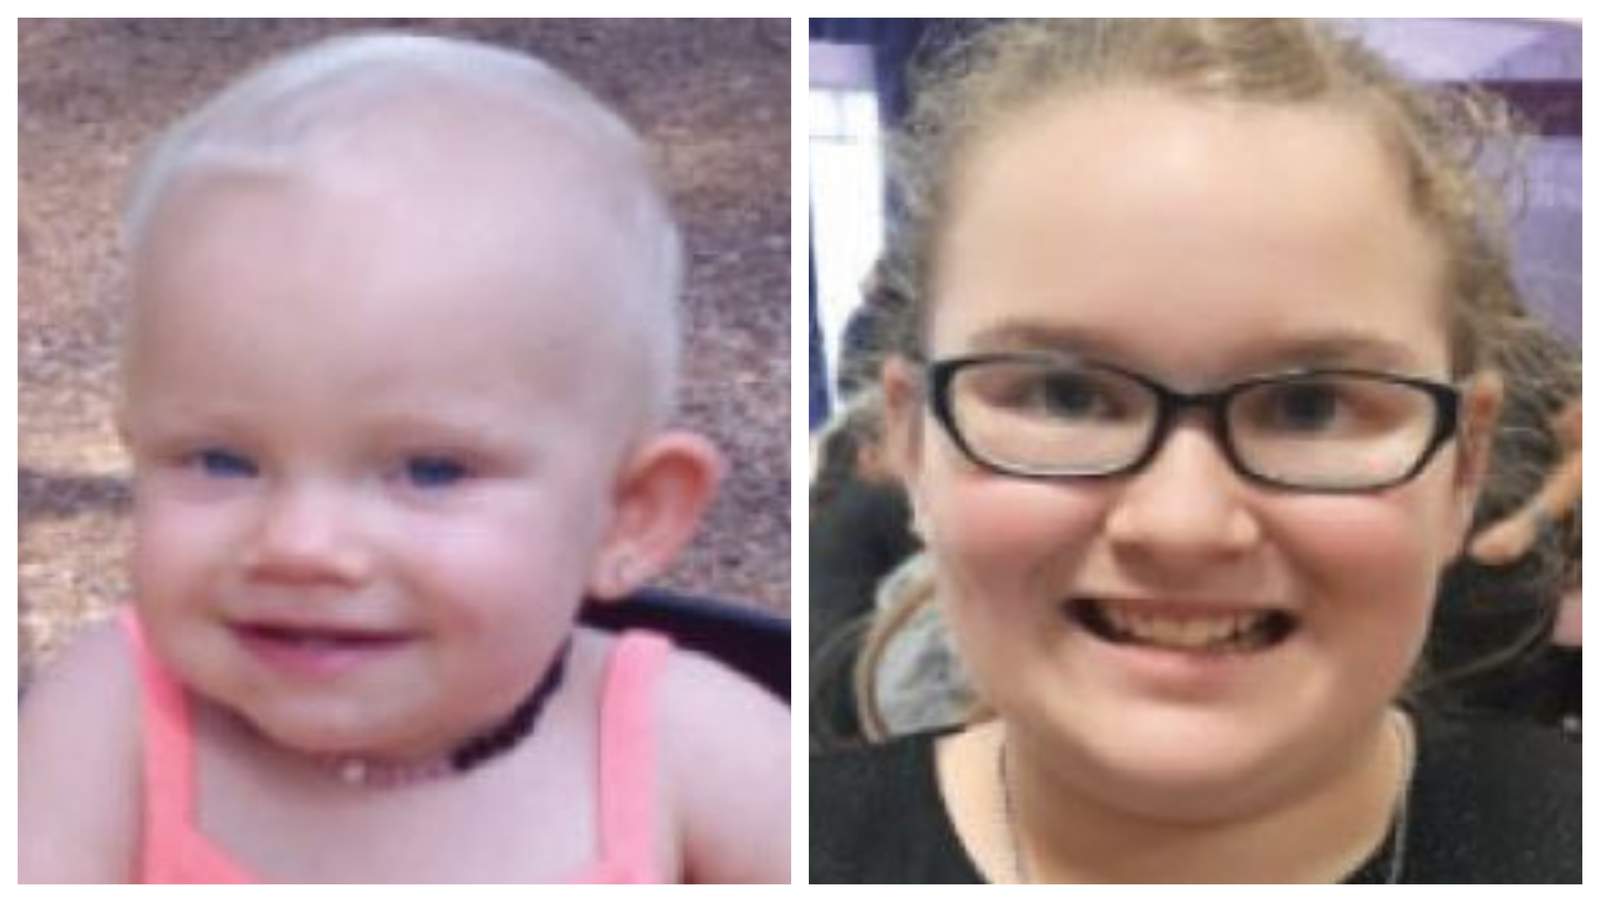 Amber alert issued for baby, girl missing from Atlanta, Texas believed to be in grave or immediate danger